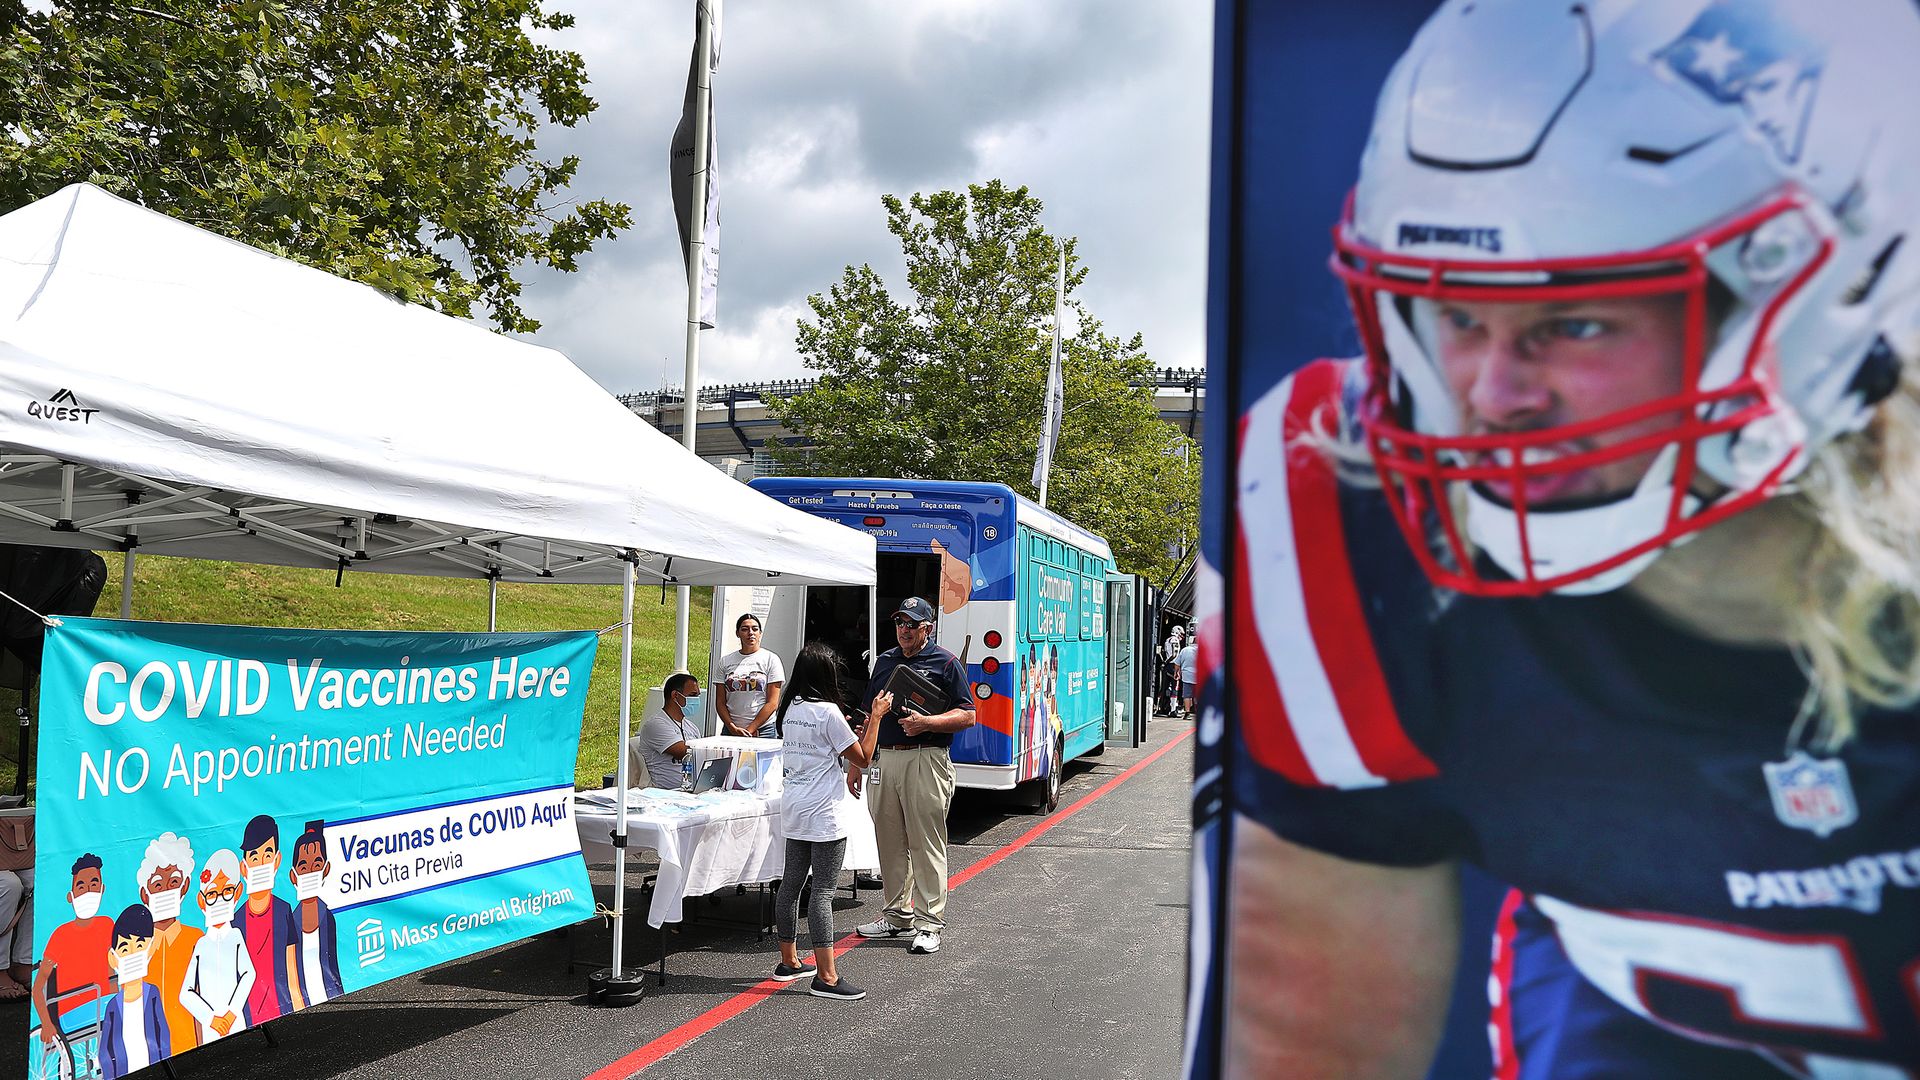  Mass General Brigham set up a mobile COVID vaccination site at the Patriots training camp outside Gillette Stadium on July 29